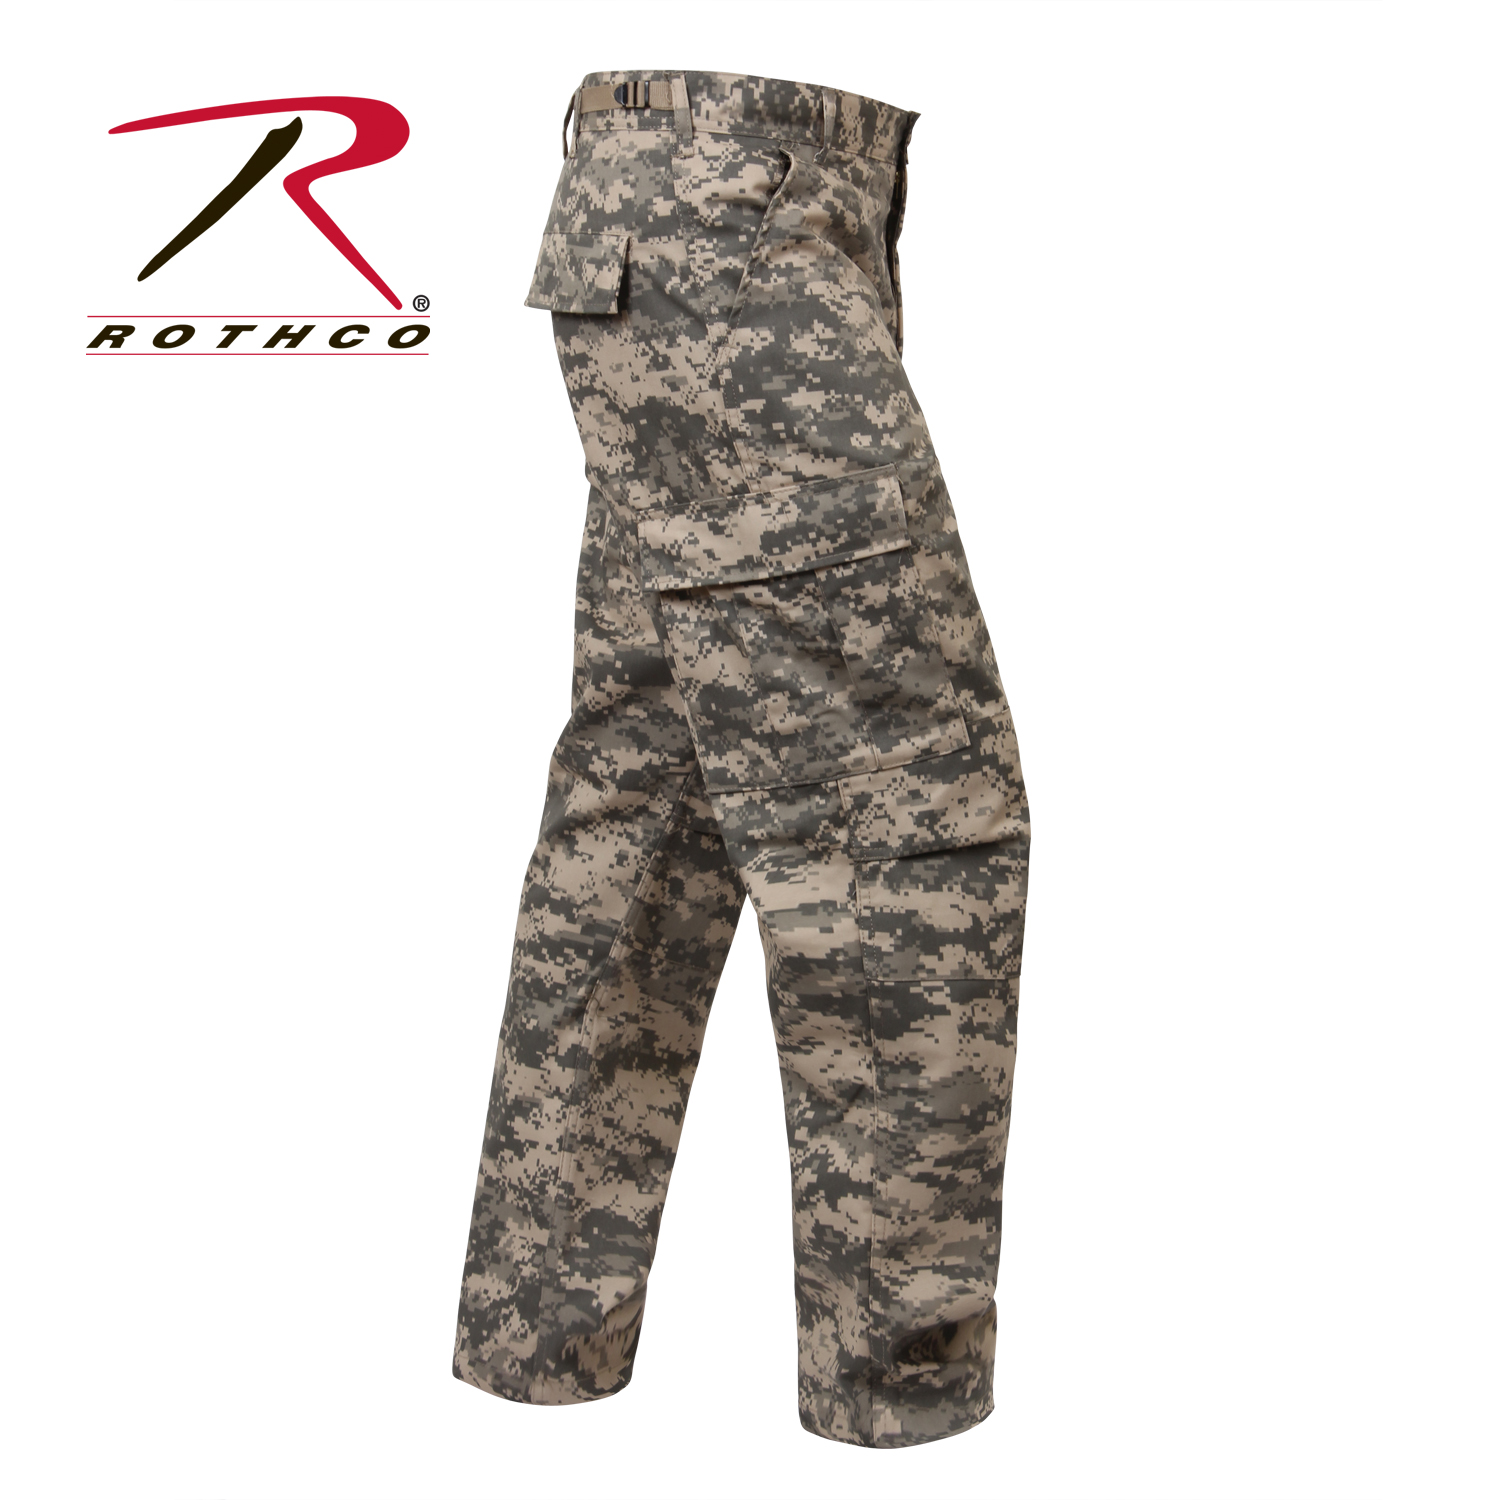 rothco tactical bdu solid black cargo pants